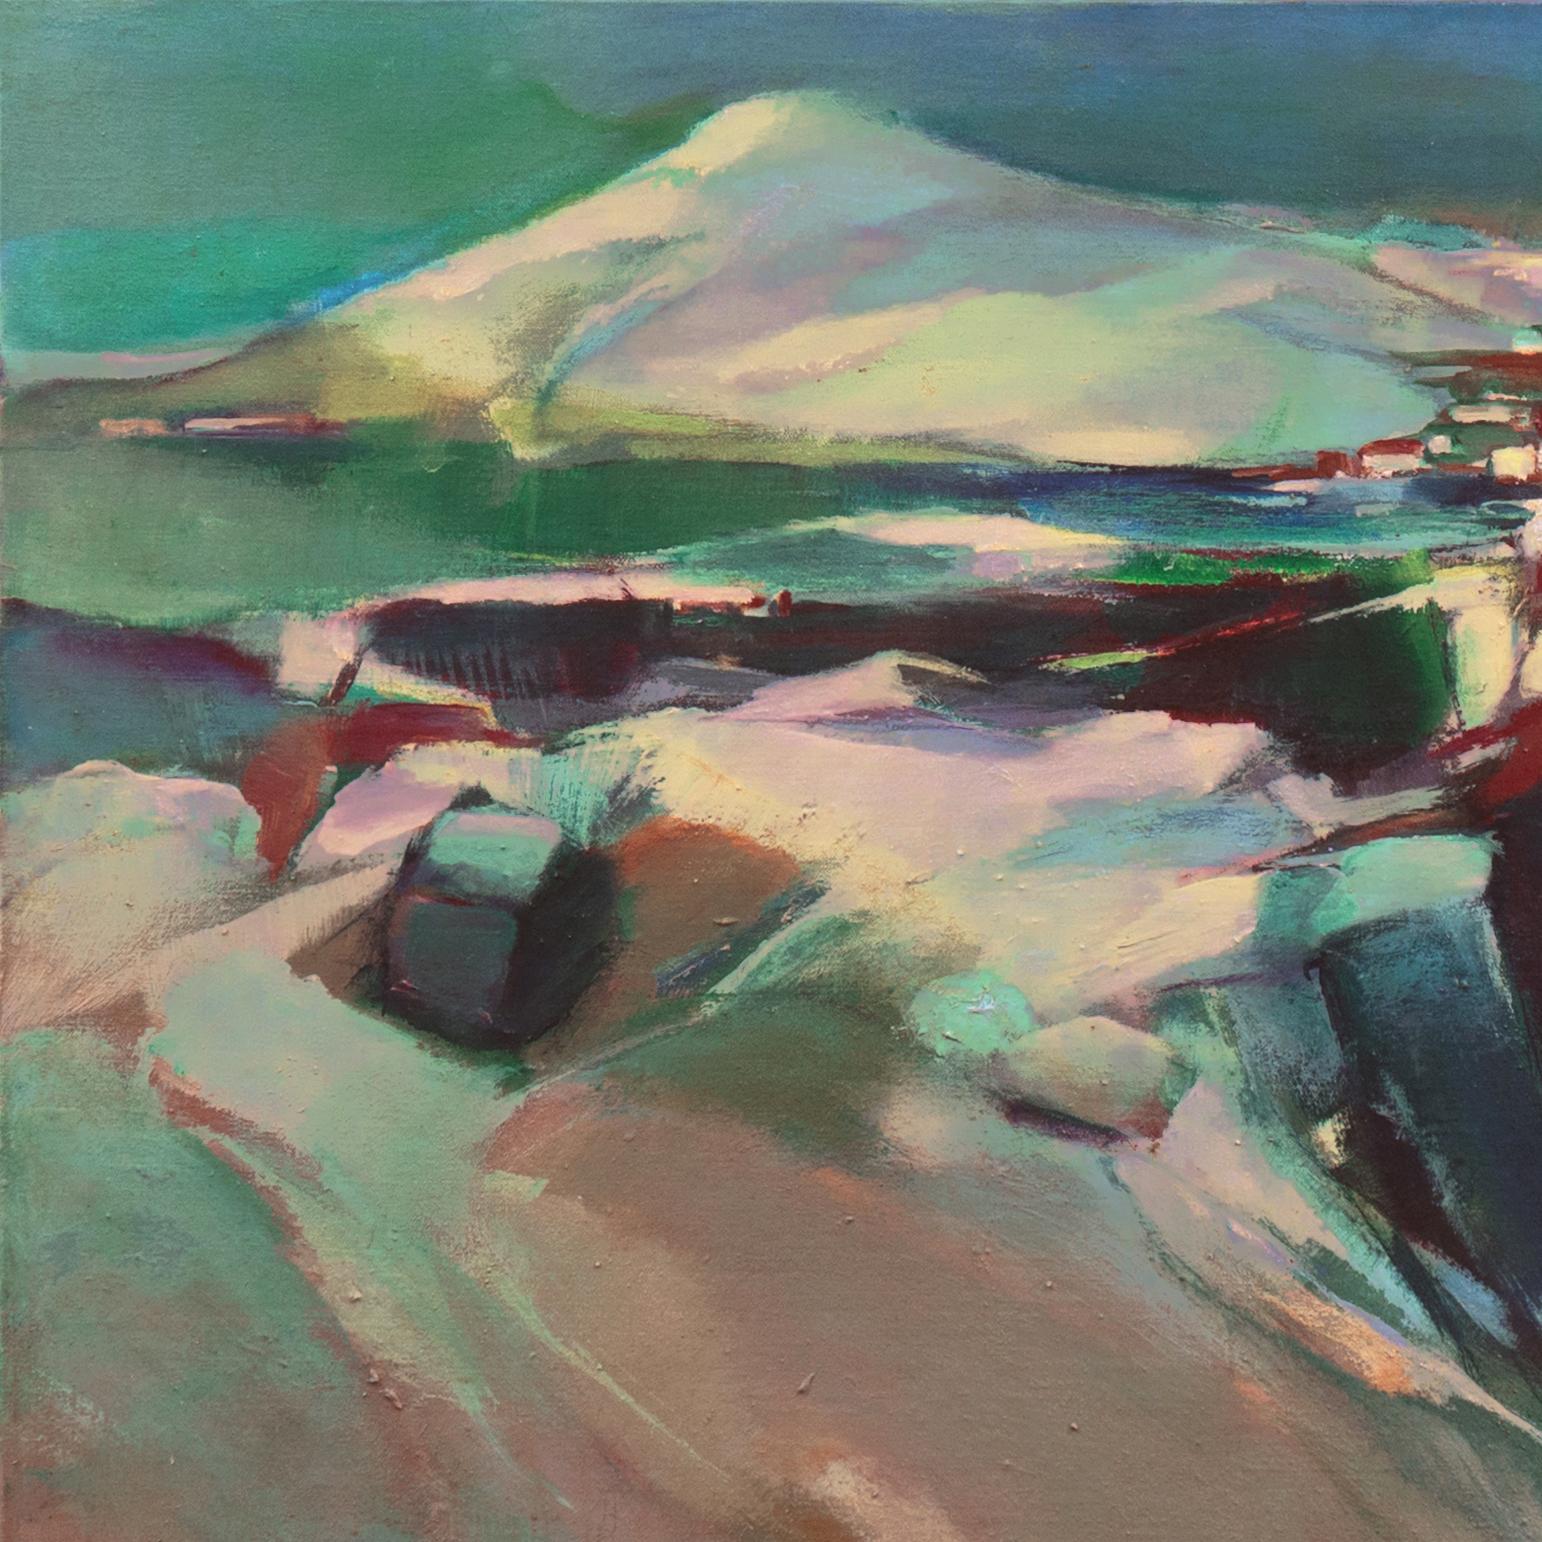 'Alpine Landscape', Bay Area Abstraction, Mid-Century Woman Modernist, CCAC - Painting by Marjorie Cathcart